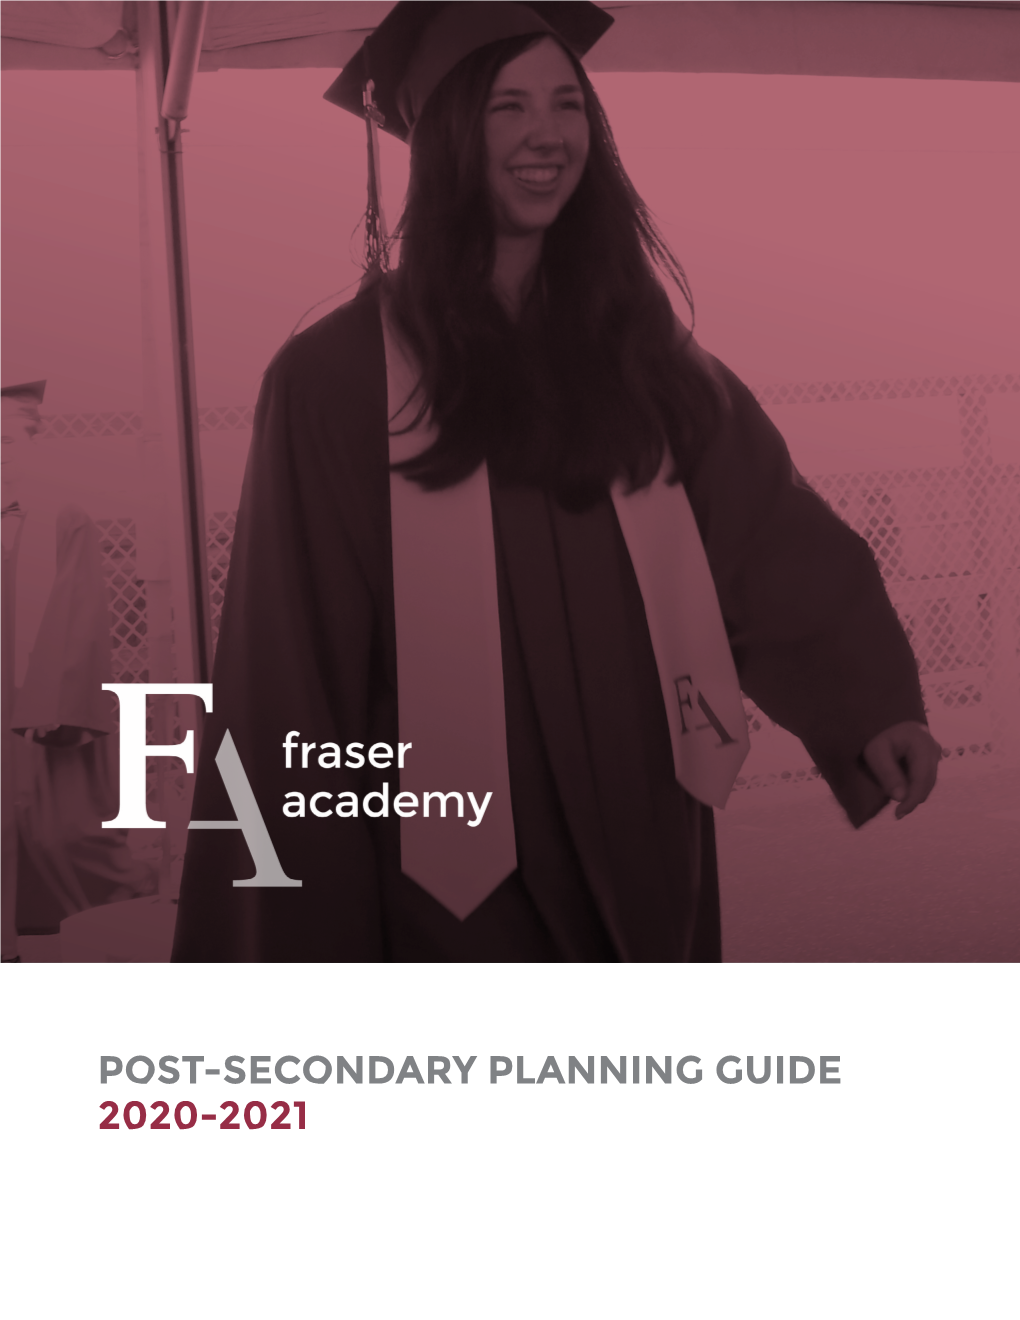 Post-Secondary Planning Guide 2020-2021 Changing Destiny by Changing Minds Contents